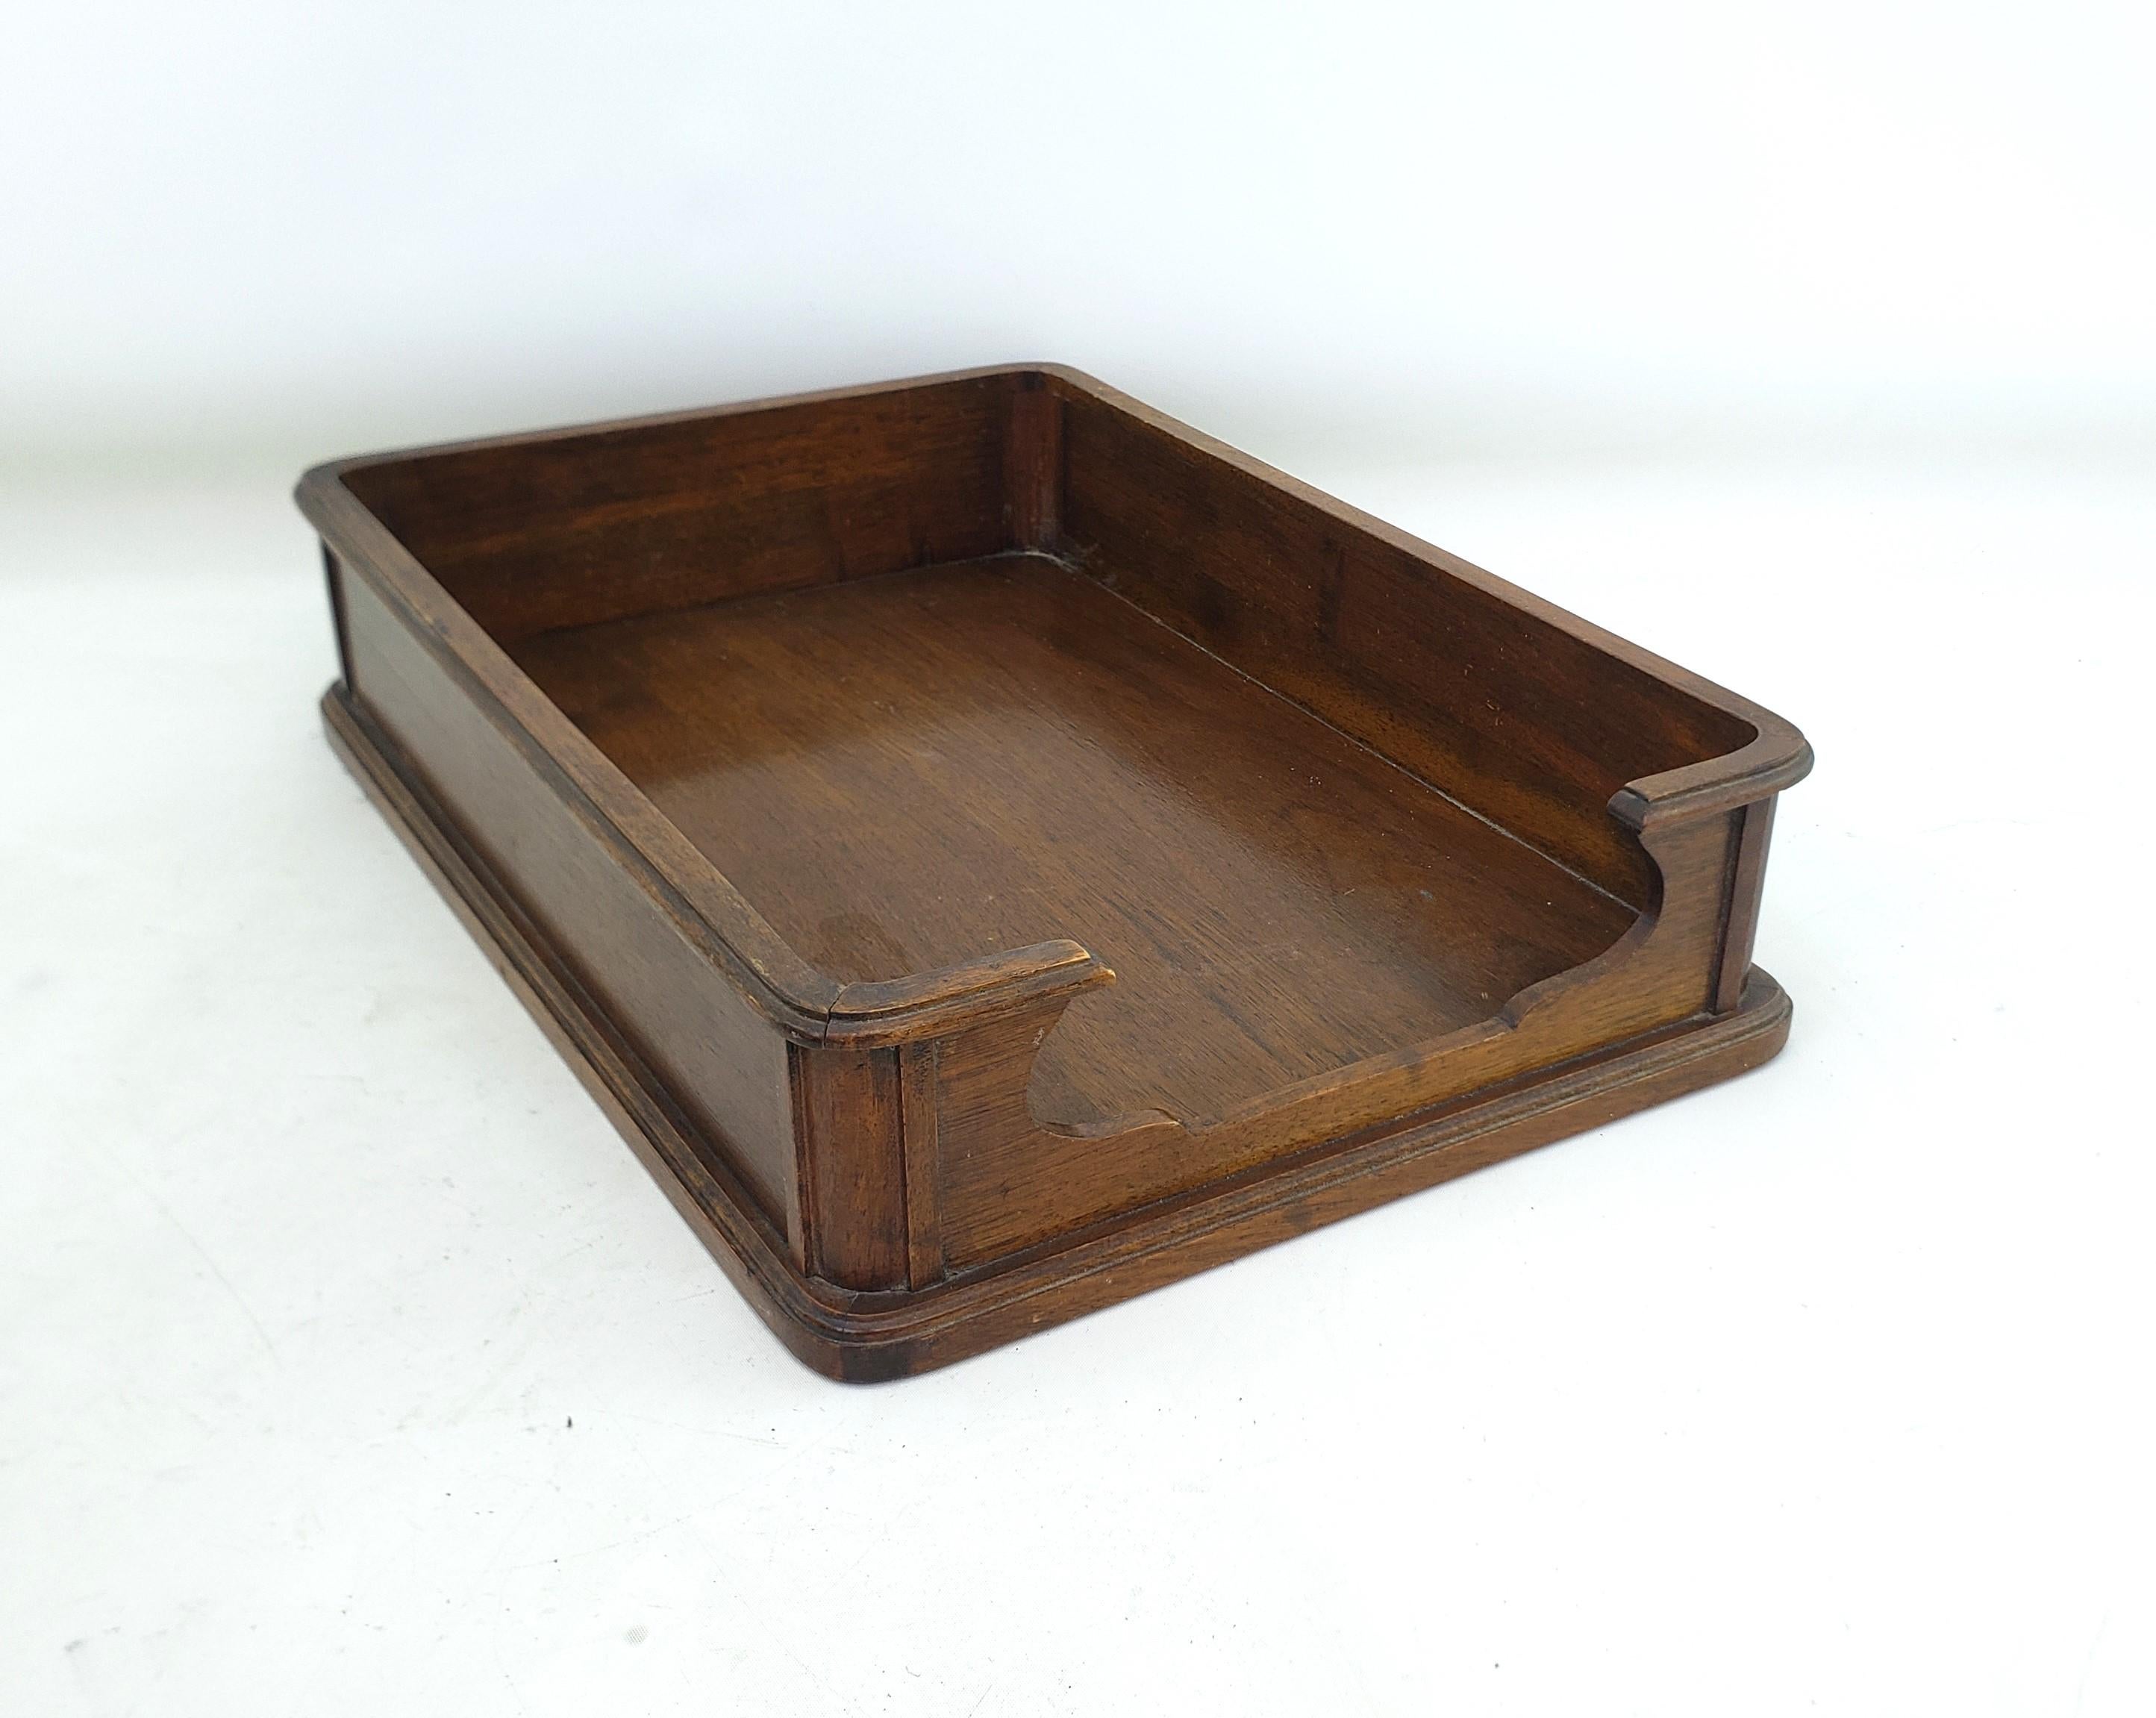 Machine-Made Antique Walnut Art Deco Executive Desk Tray or Document & Letter Holder For Sale